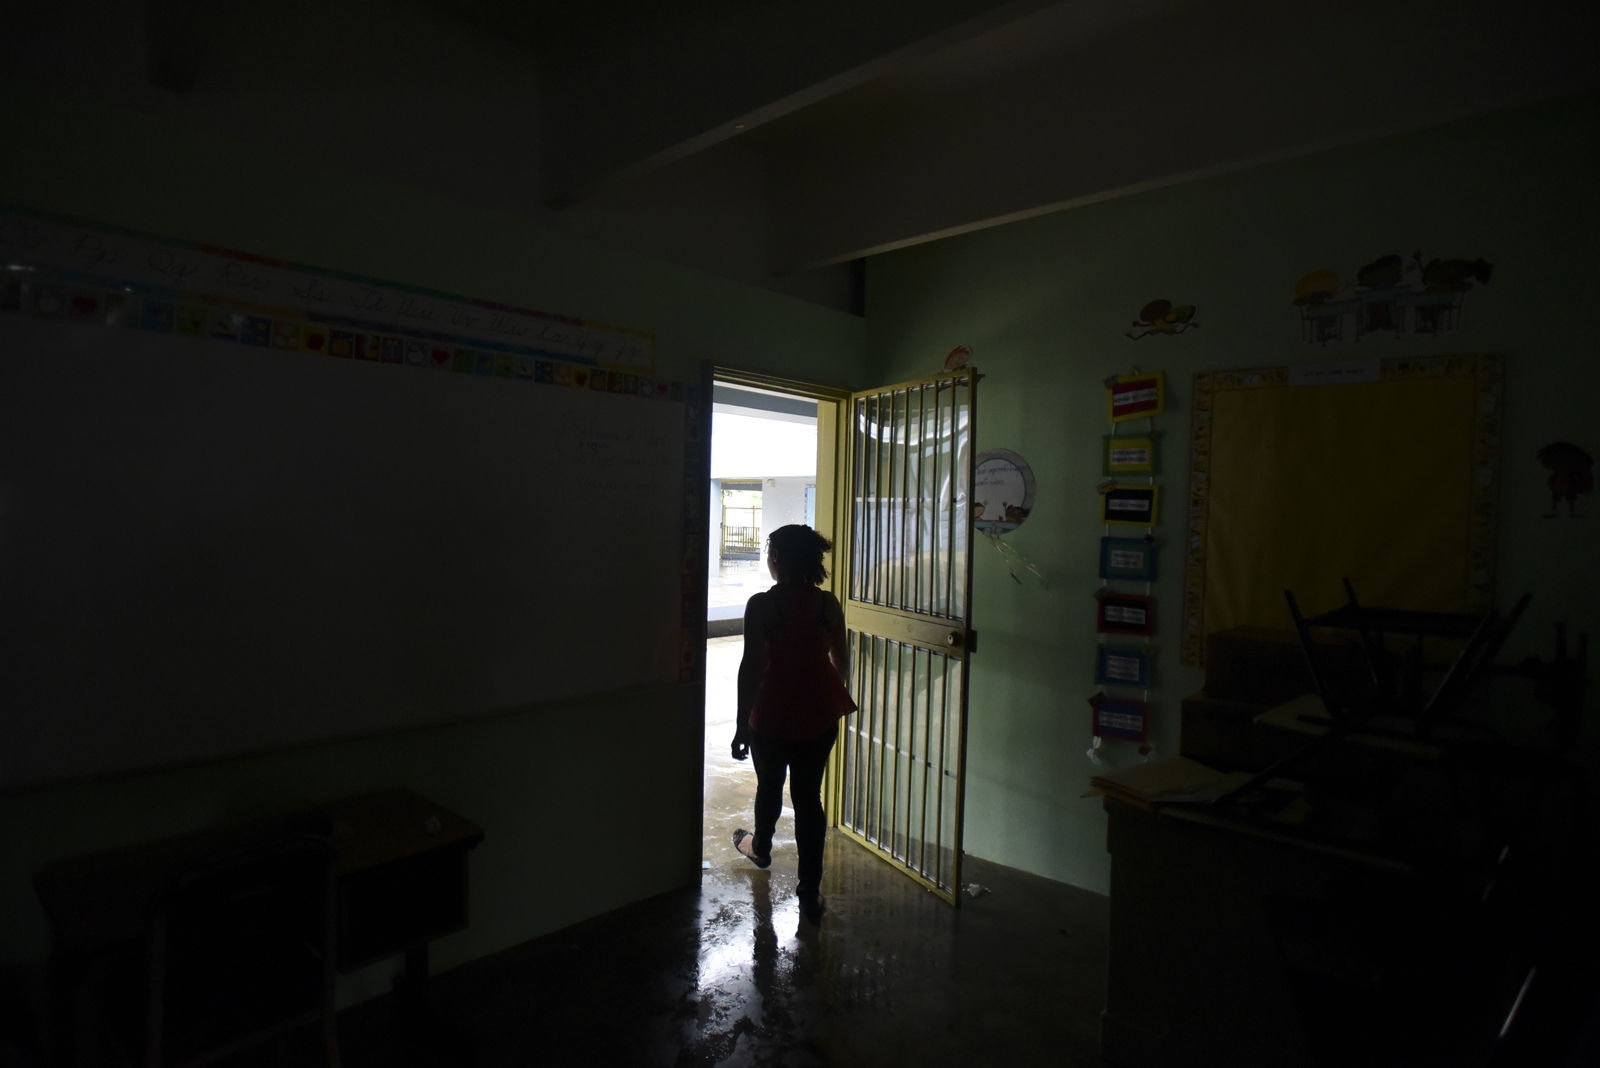 A woman looks outside from a shelter set up at the Berta Zalduondo elementary school during the passage of Hurricane Irma in Fajardo, northeastern Puerto Rico, Wednesday, Sept. 6, 2017. Heavy rain and high winds lashed Puerto Ricoâ€™s northeast coast Wednesday as Hurricane Irma roared through Caribbean islands. (AP Photo/Carlos Giusti) NO PUBLICAR EN PUERTO RICO